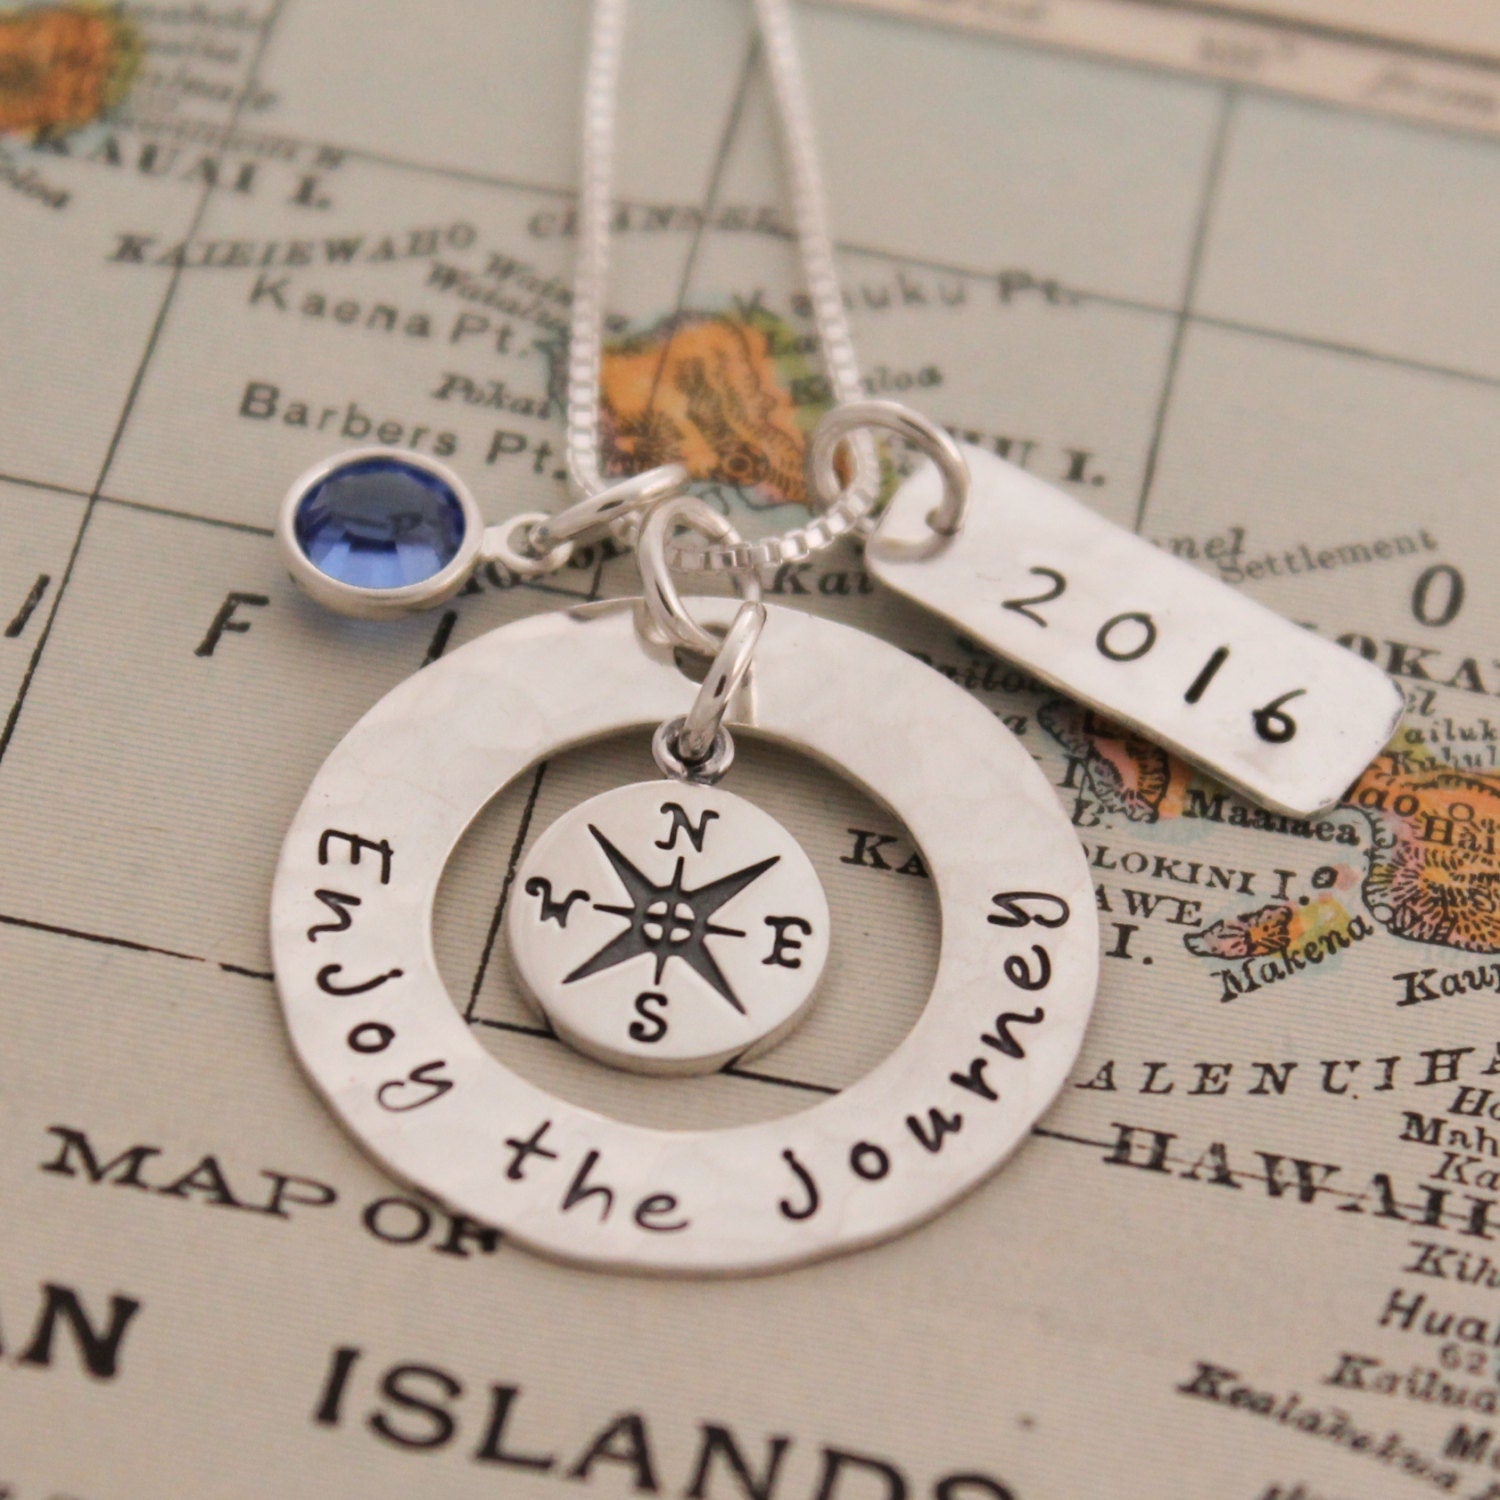 Enjoy the Journey Necklace, Compass Necklace, Travel Jewelry, Deployment, Graduation Gift, Hand Stamped Necklace, Personlized Jewelry